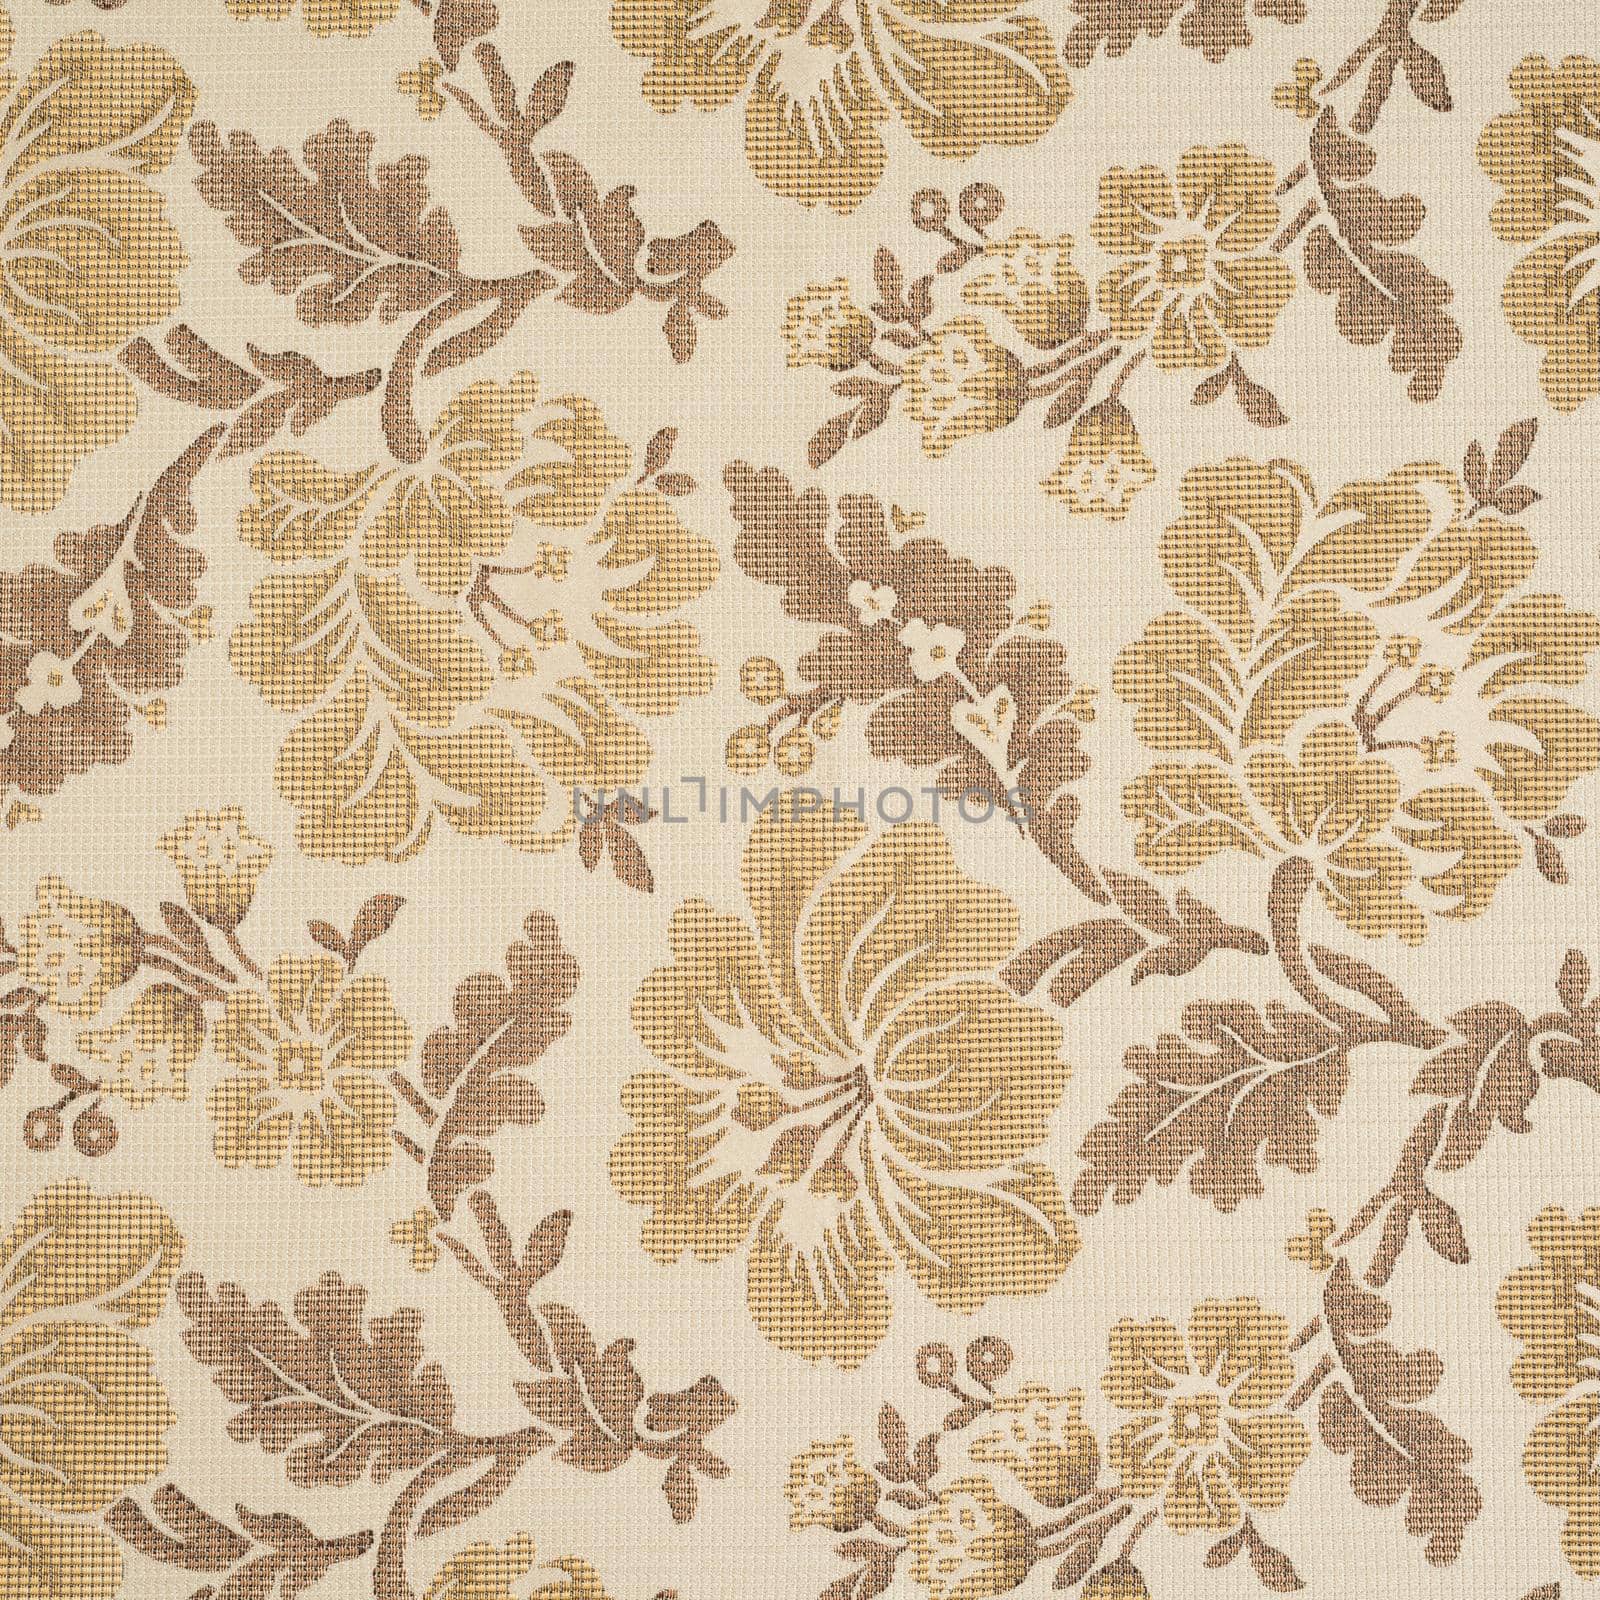 Fabric background with floral pattern by nikitabuida